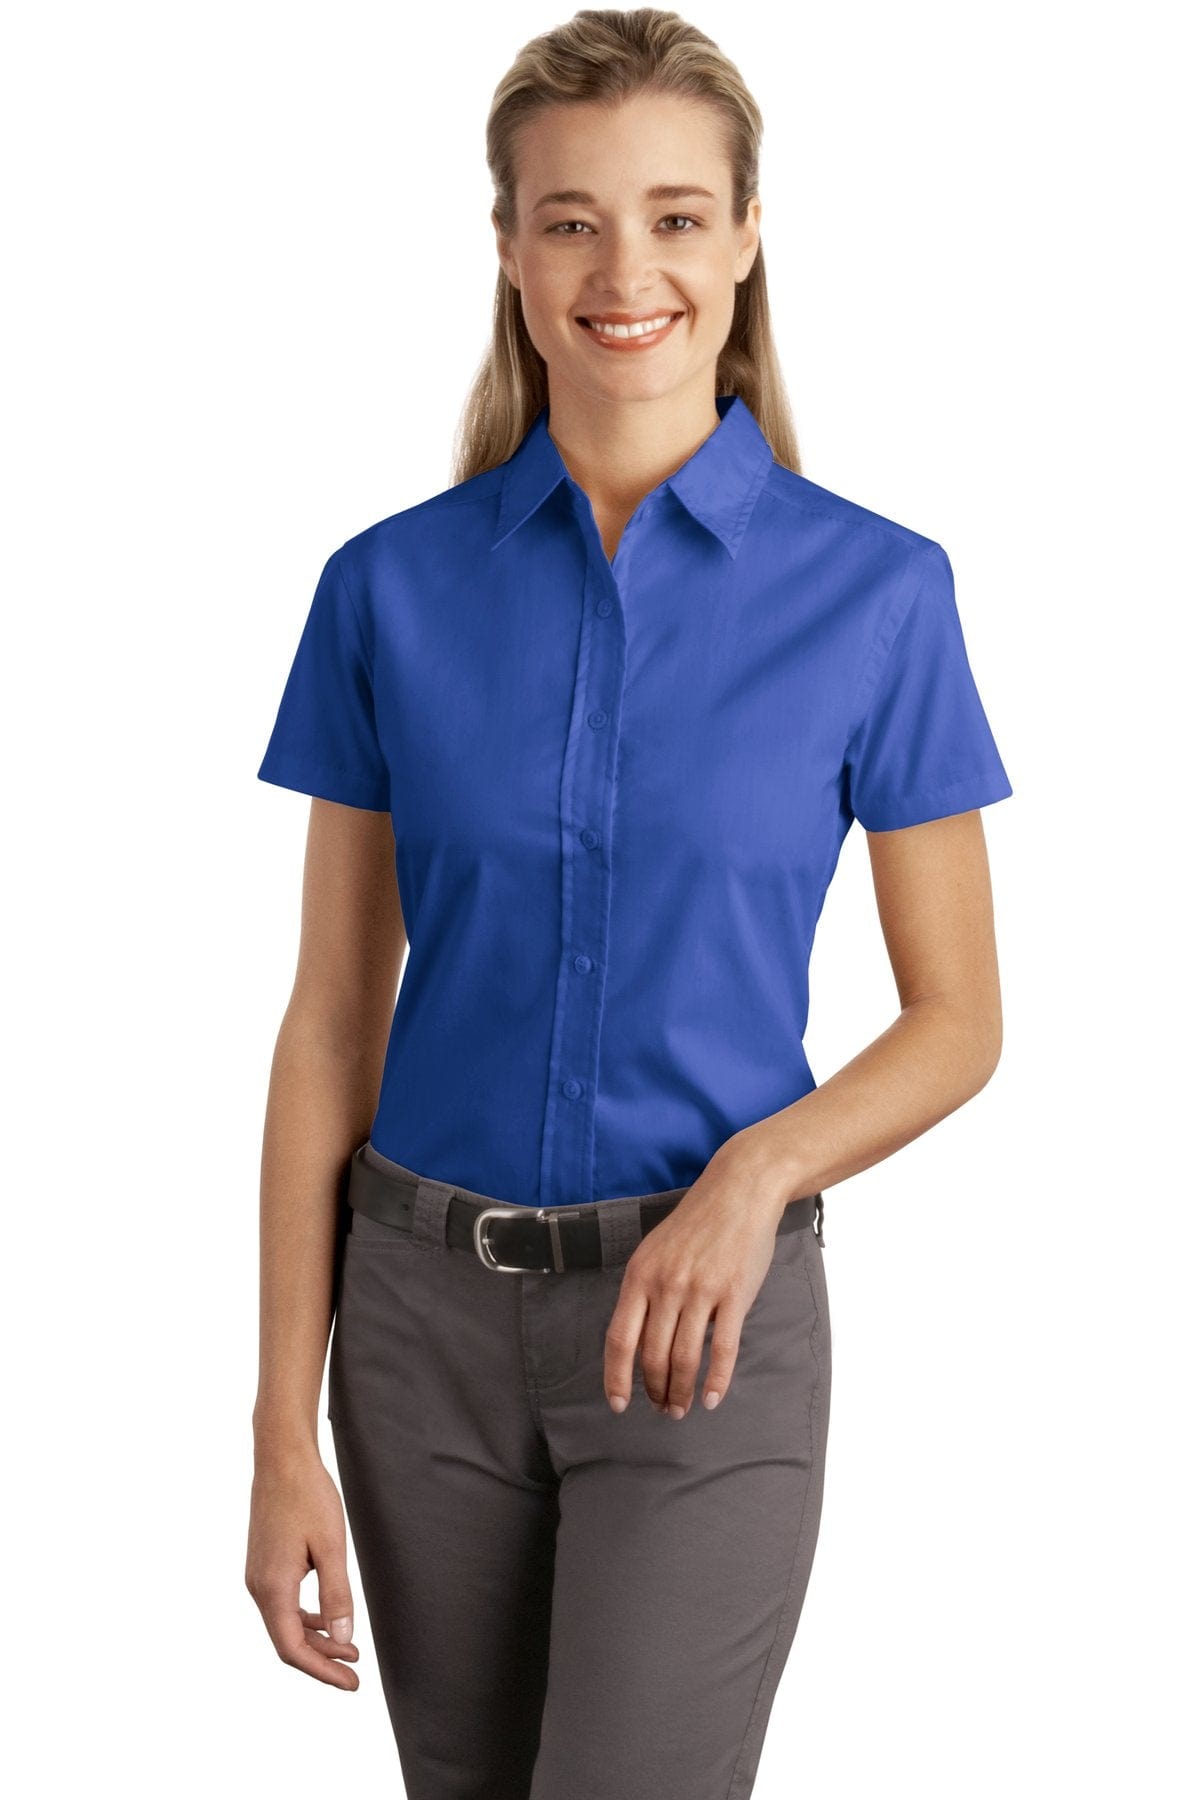 DISCONTINUED  Port Authority® Ladies Short Sleeve Easy Care, Soil Resistant Shirt.  L507